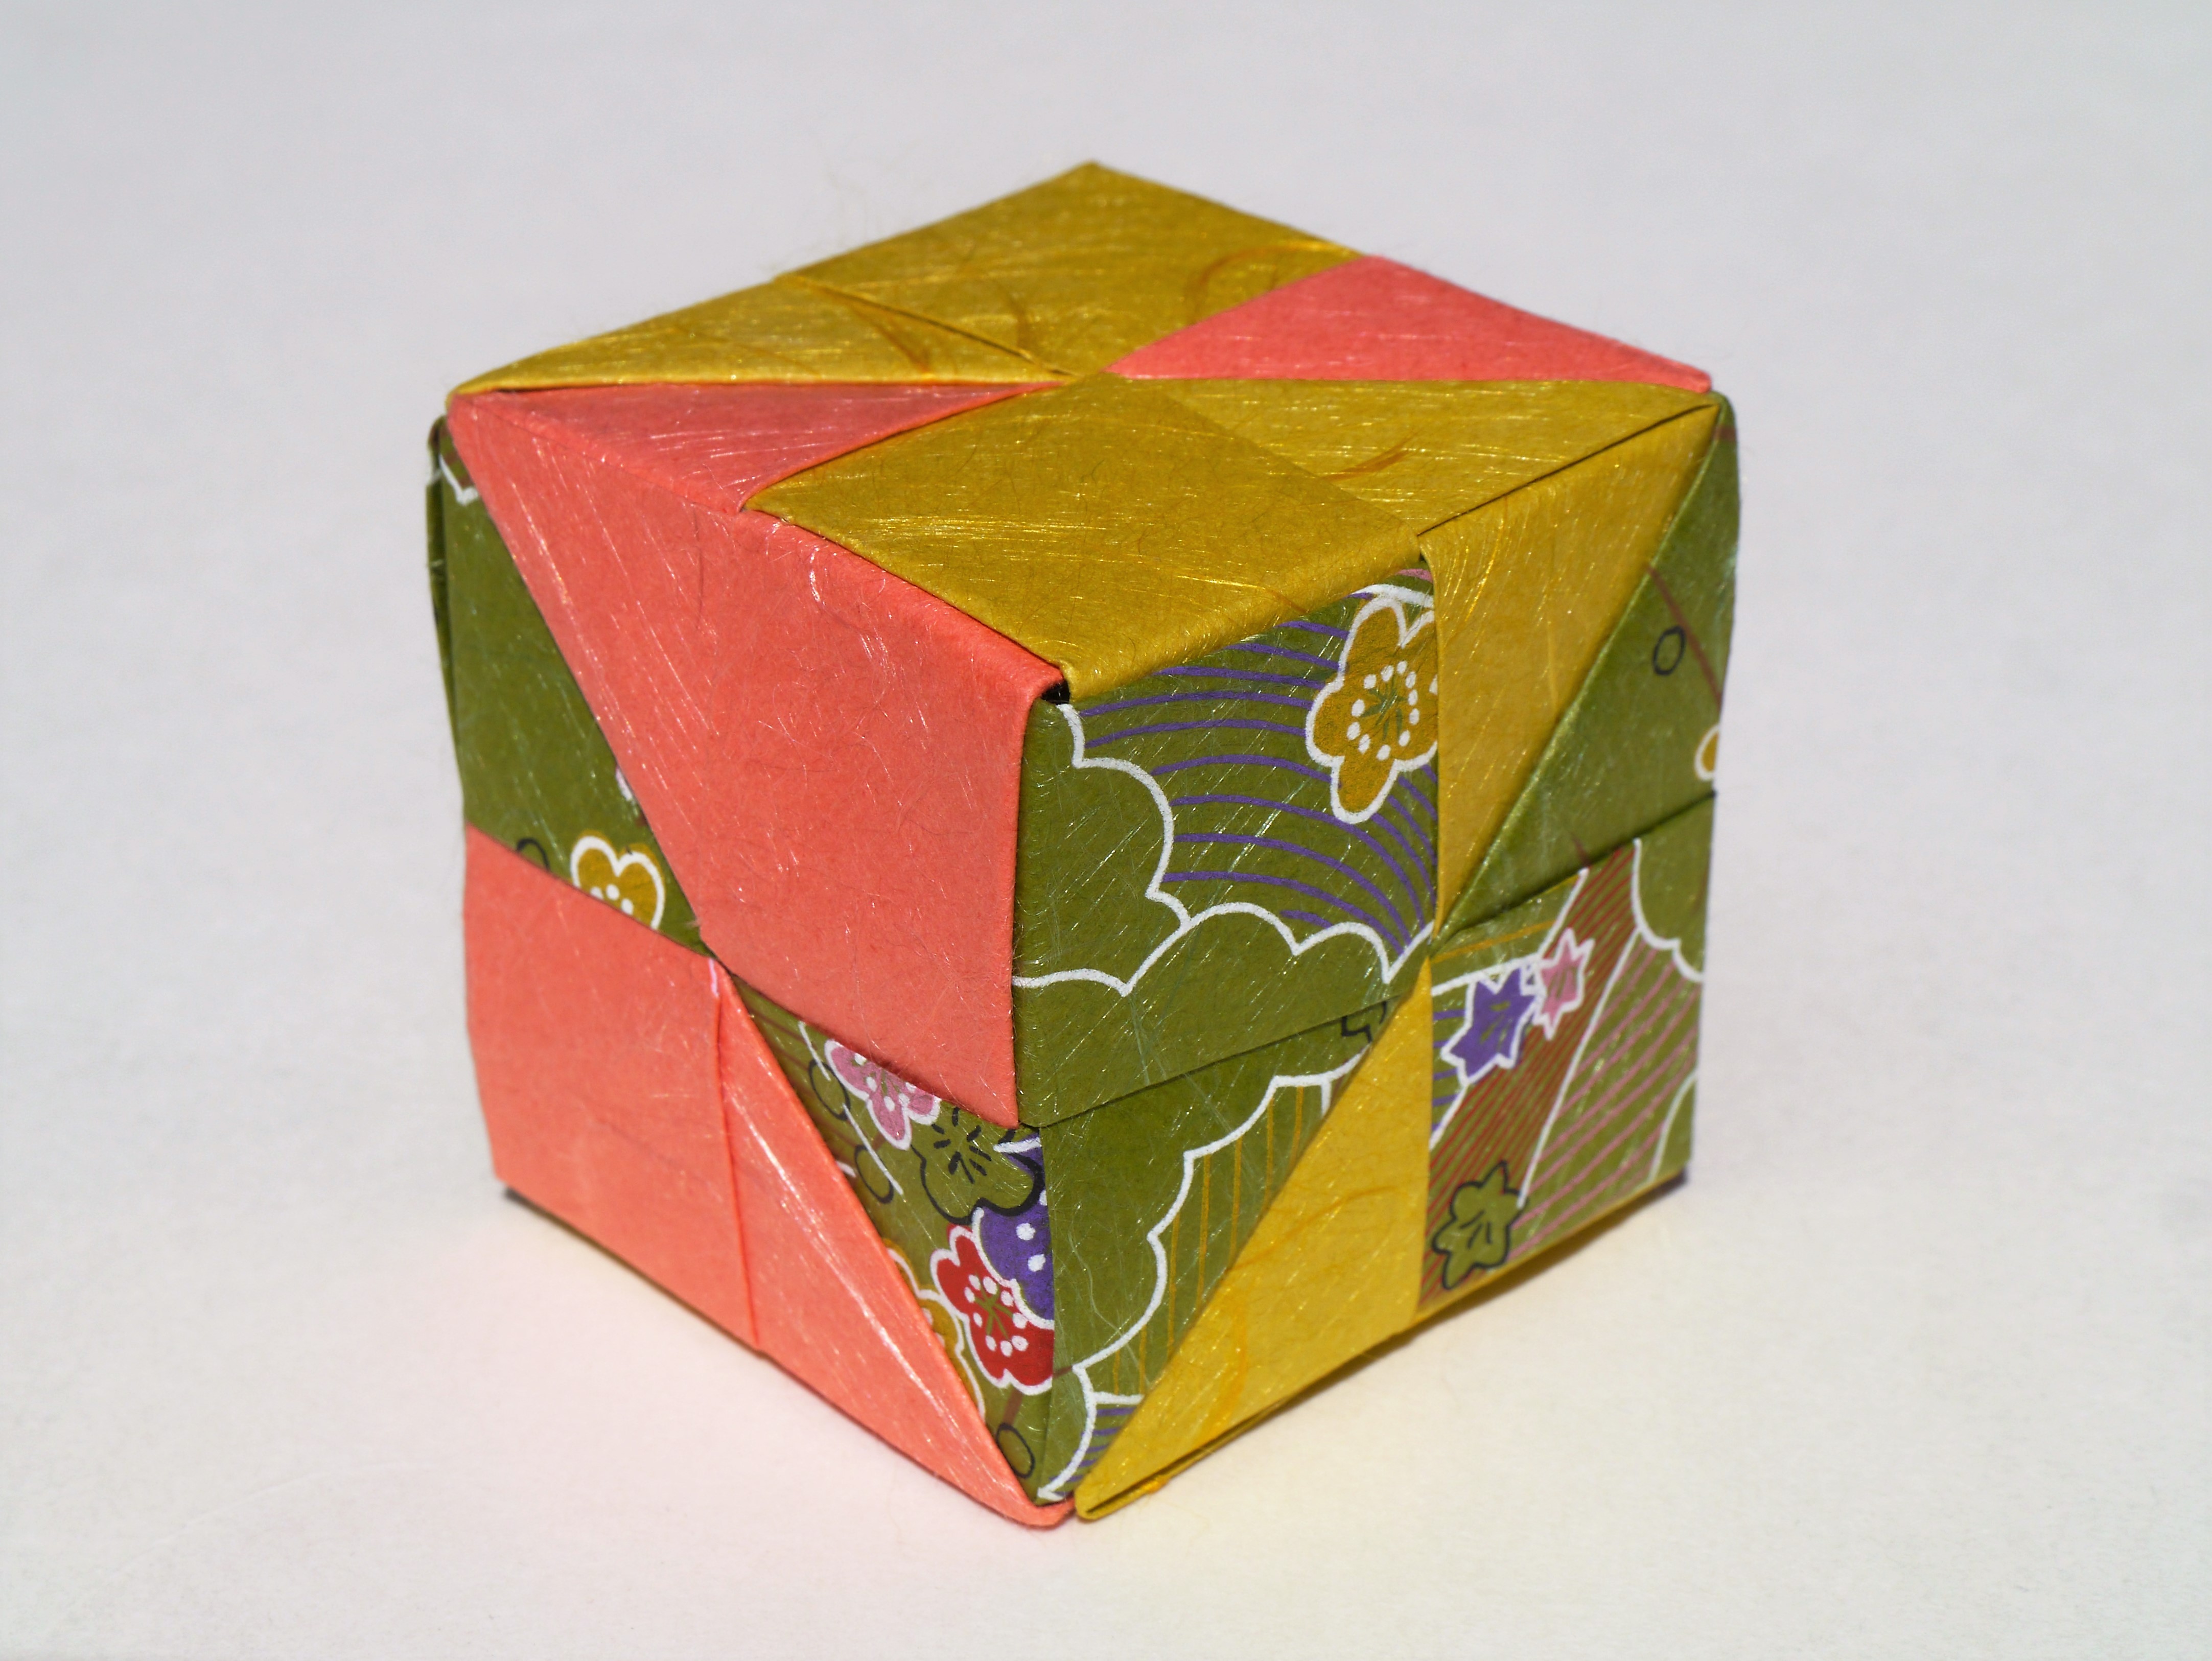 You just learned how to make an origami cube!